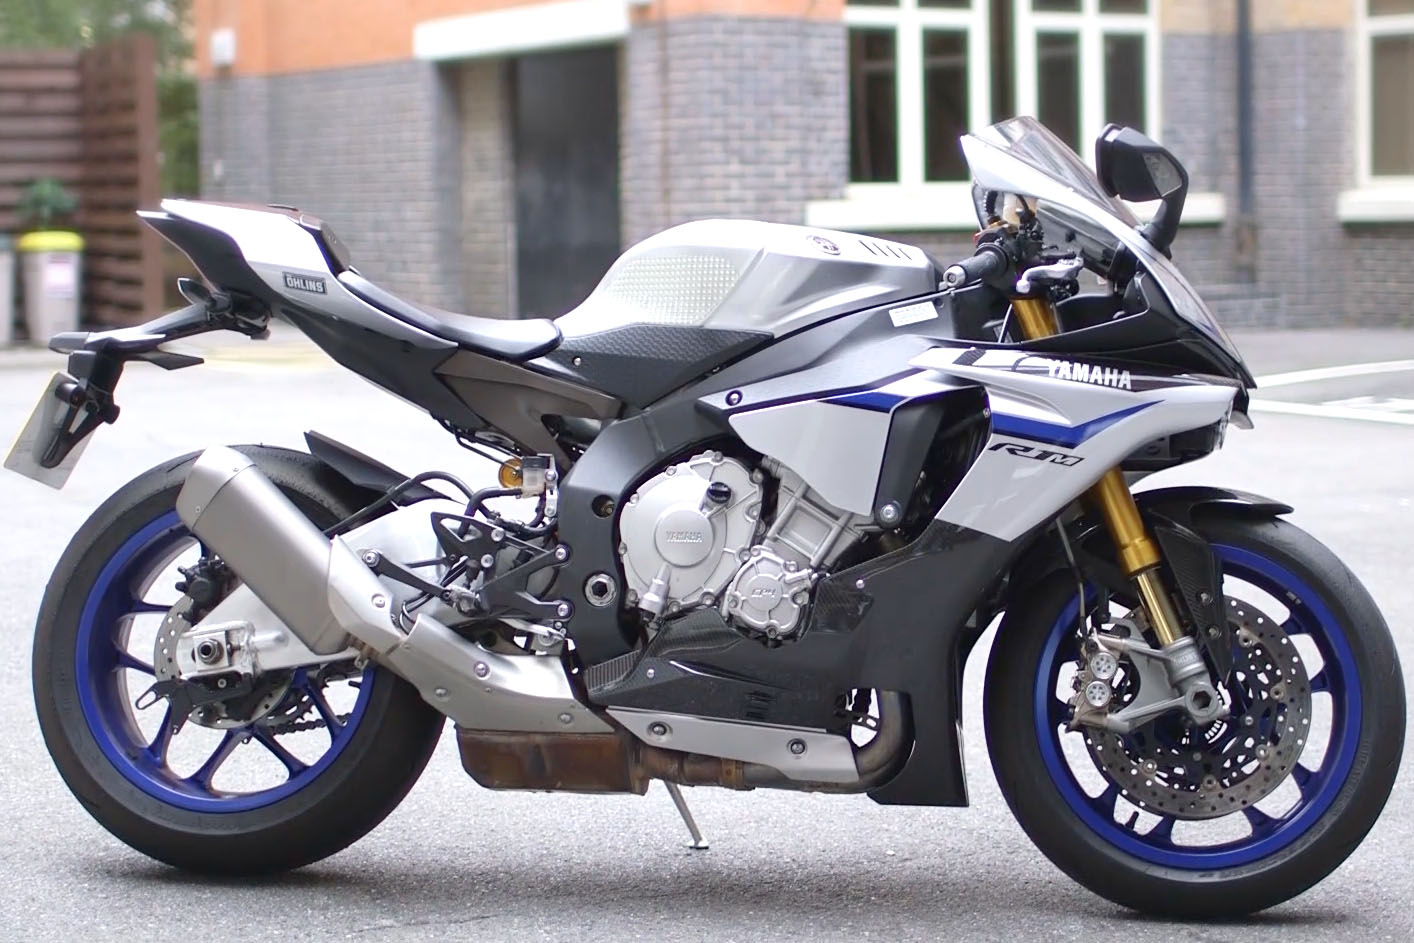 Video review: Yamaha R1M